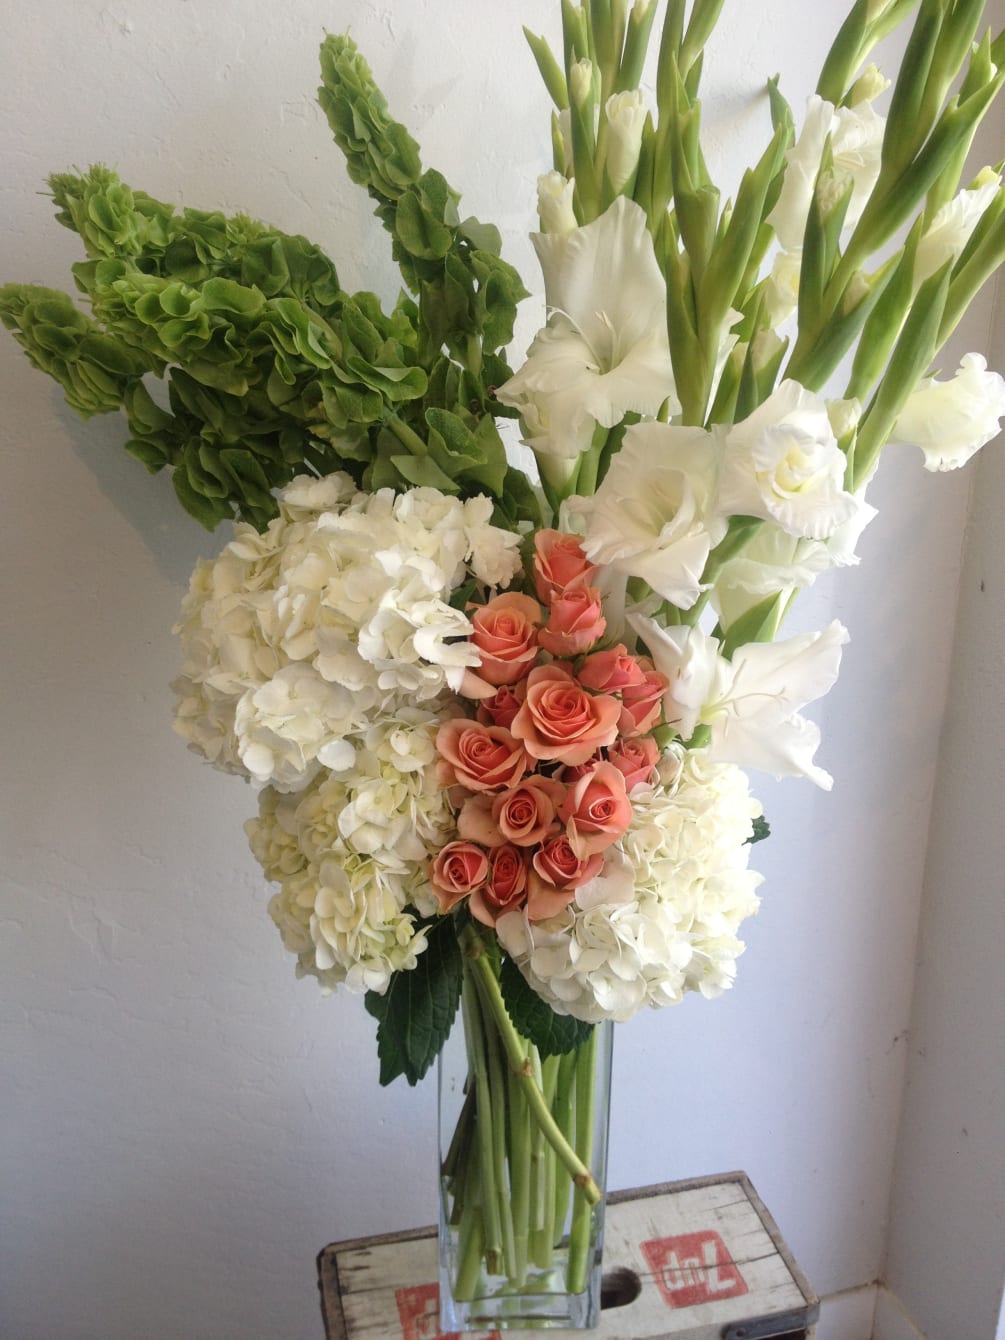 A tasteful and modern design of  blooming white gladiolus, green bells